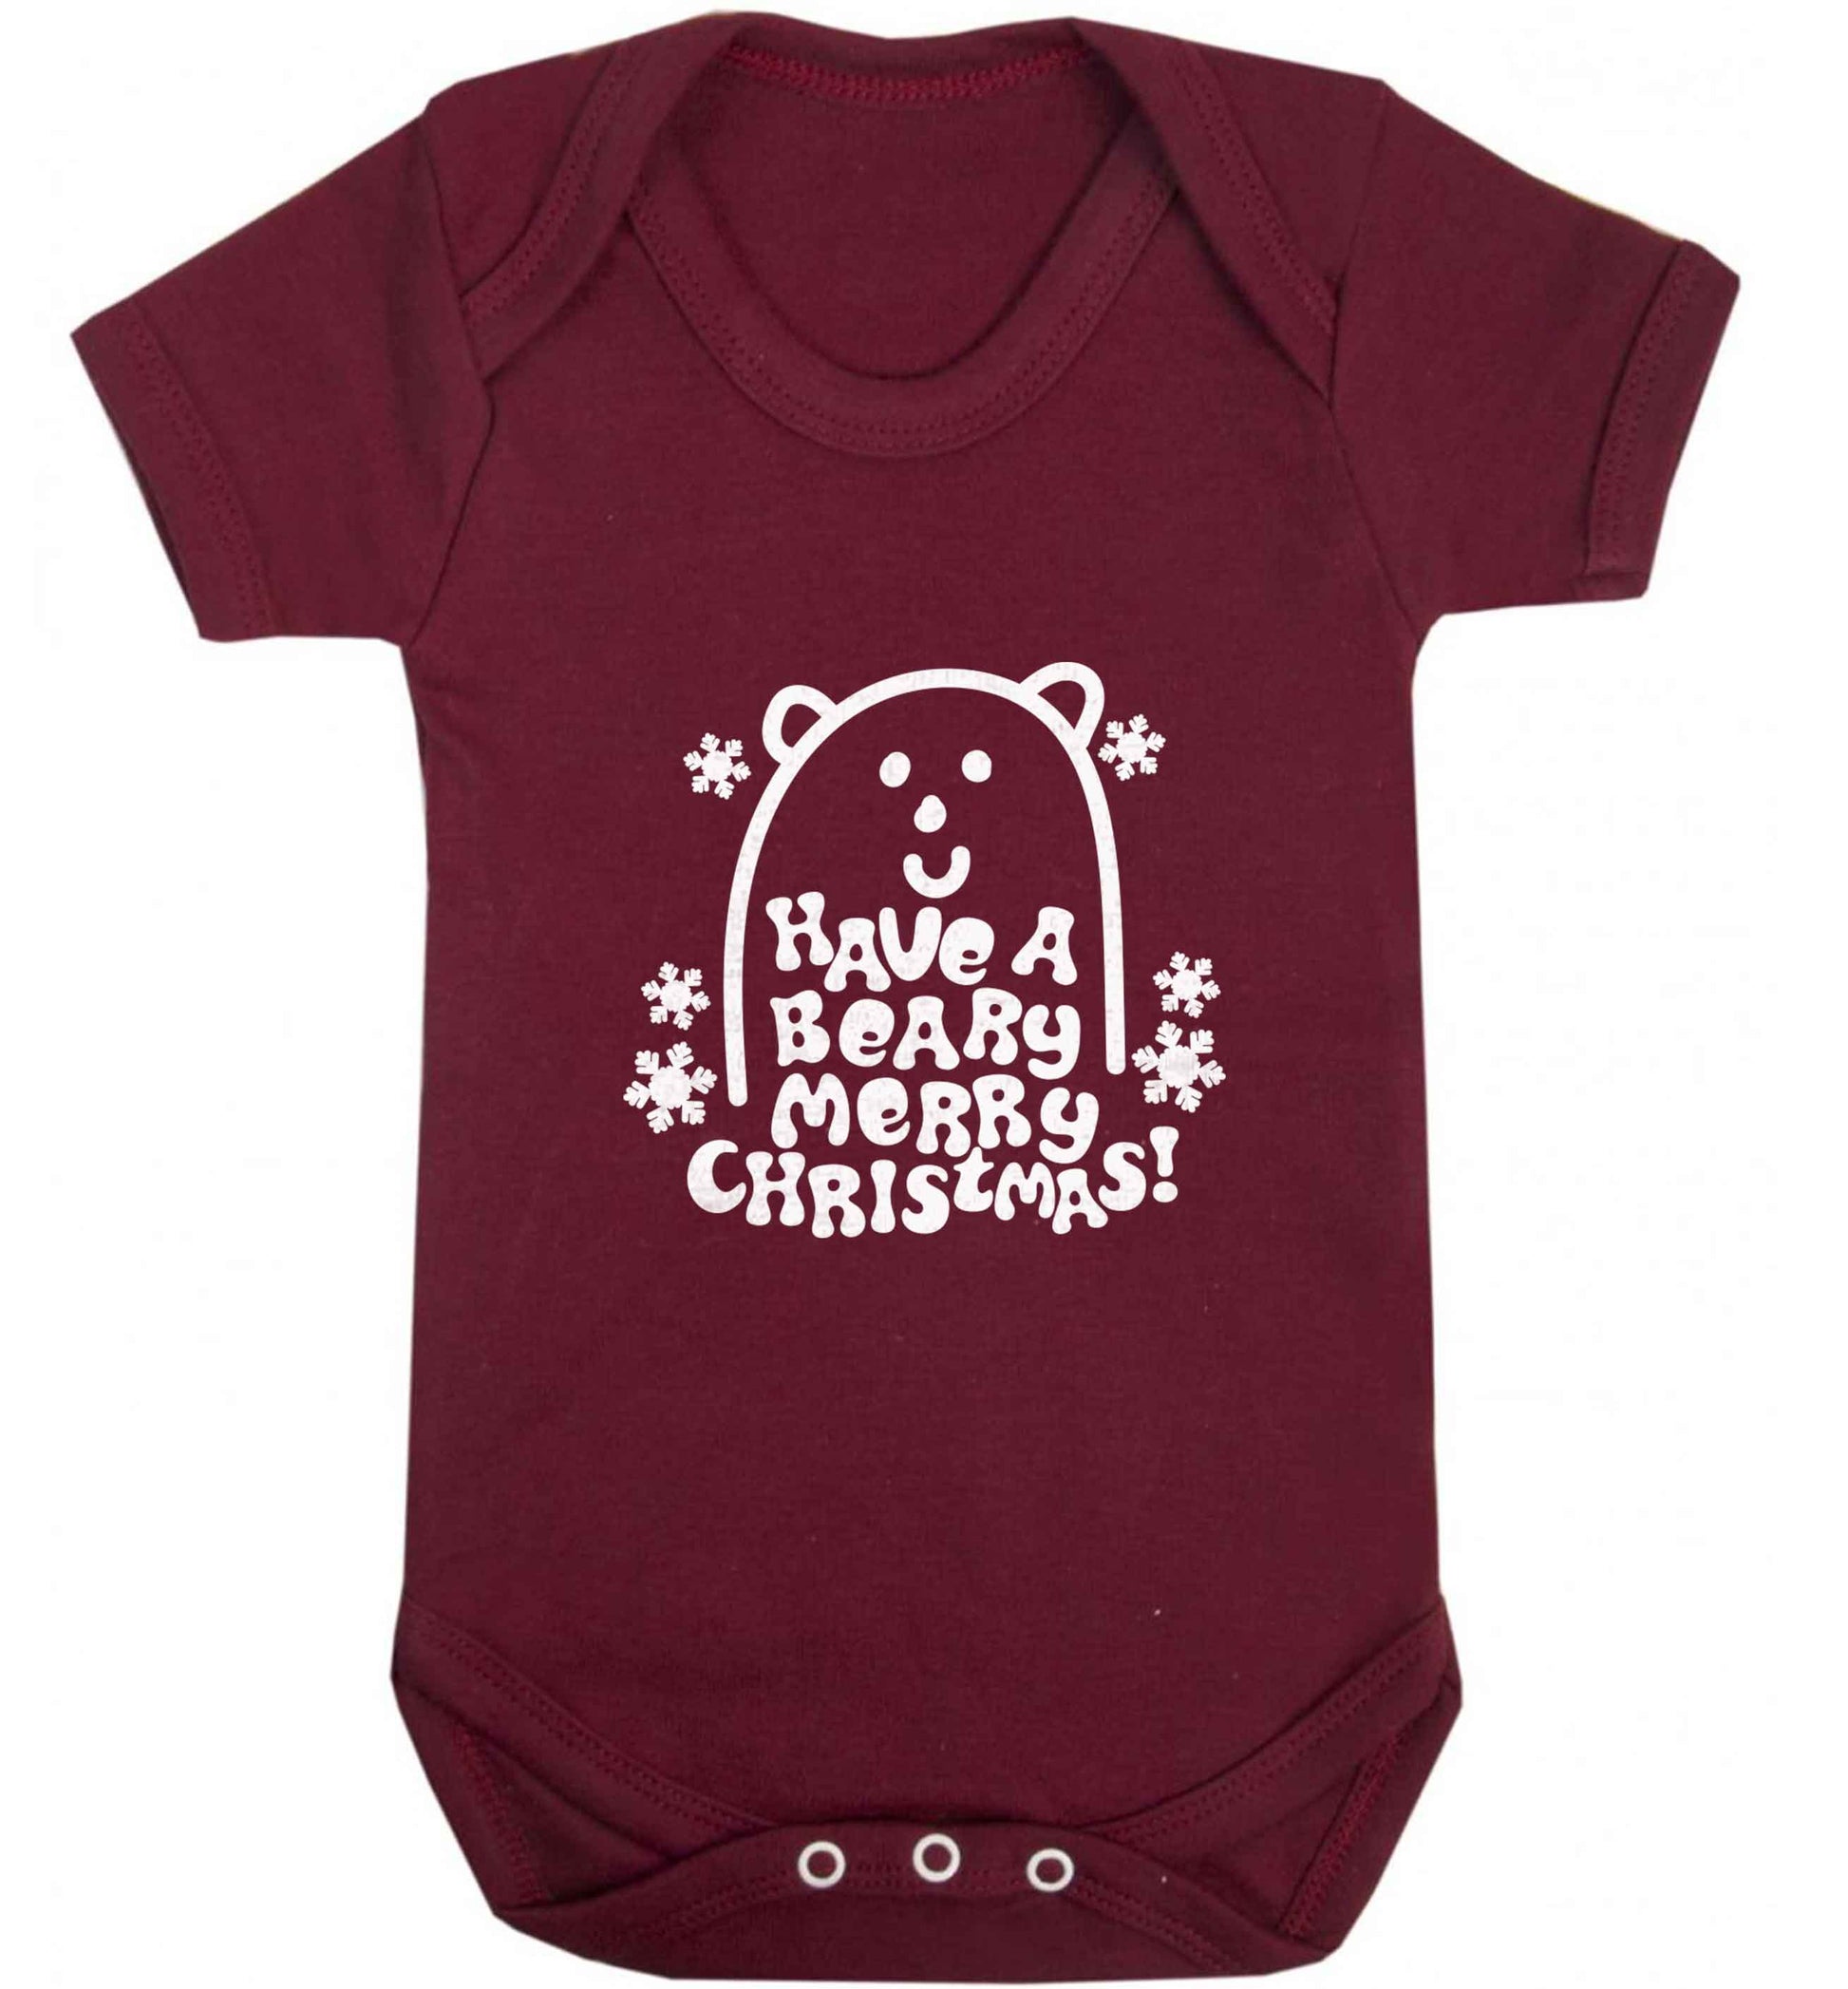 Save The Polar Bears baby vest maroon 18-24 months